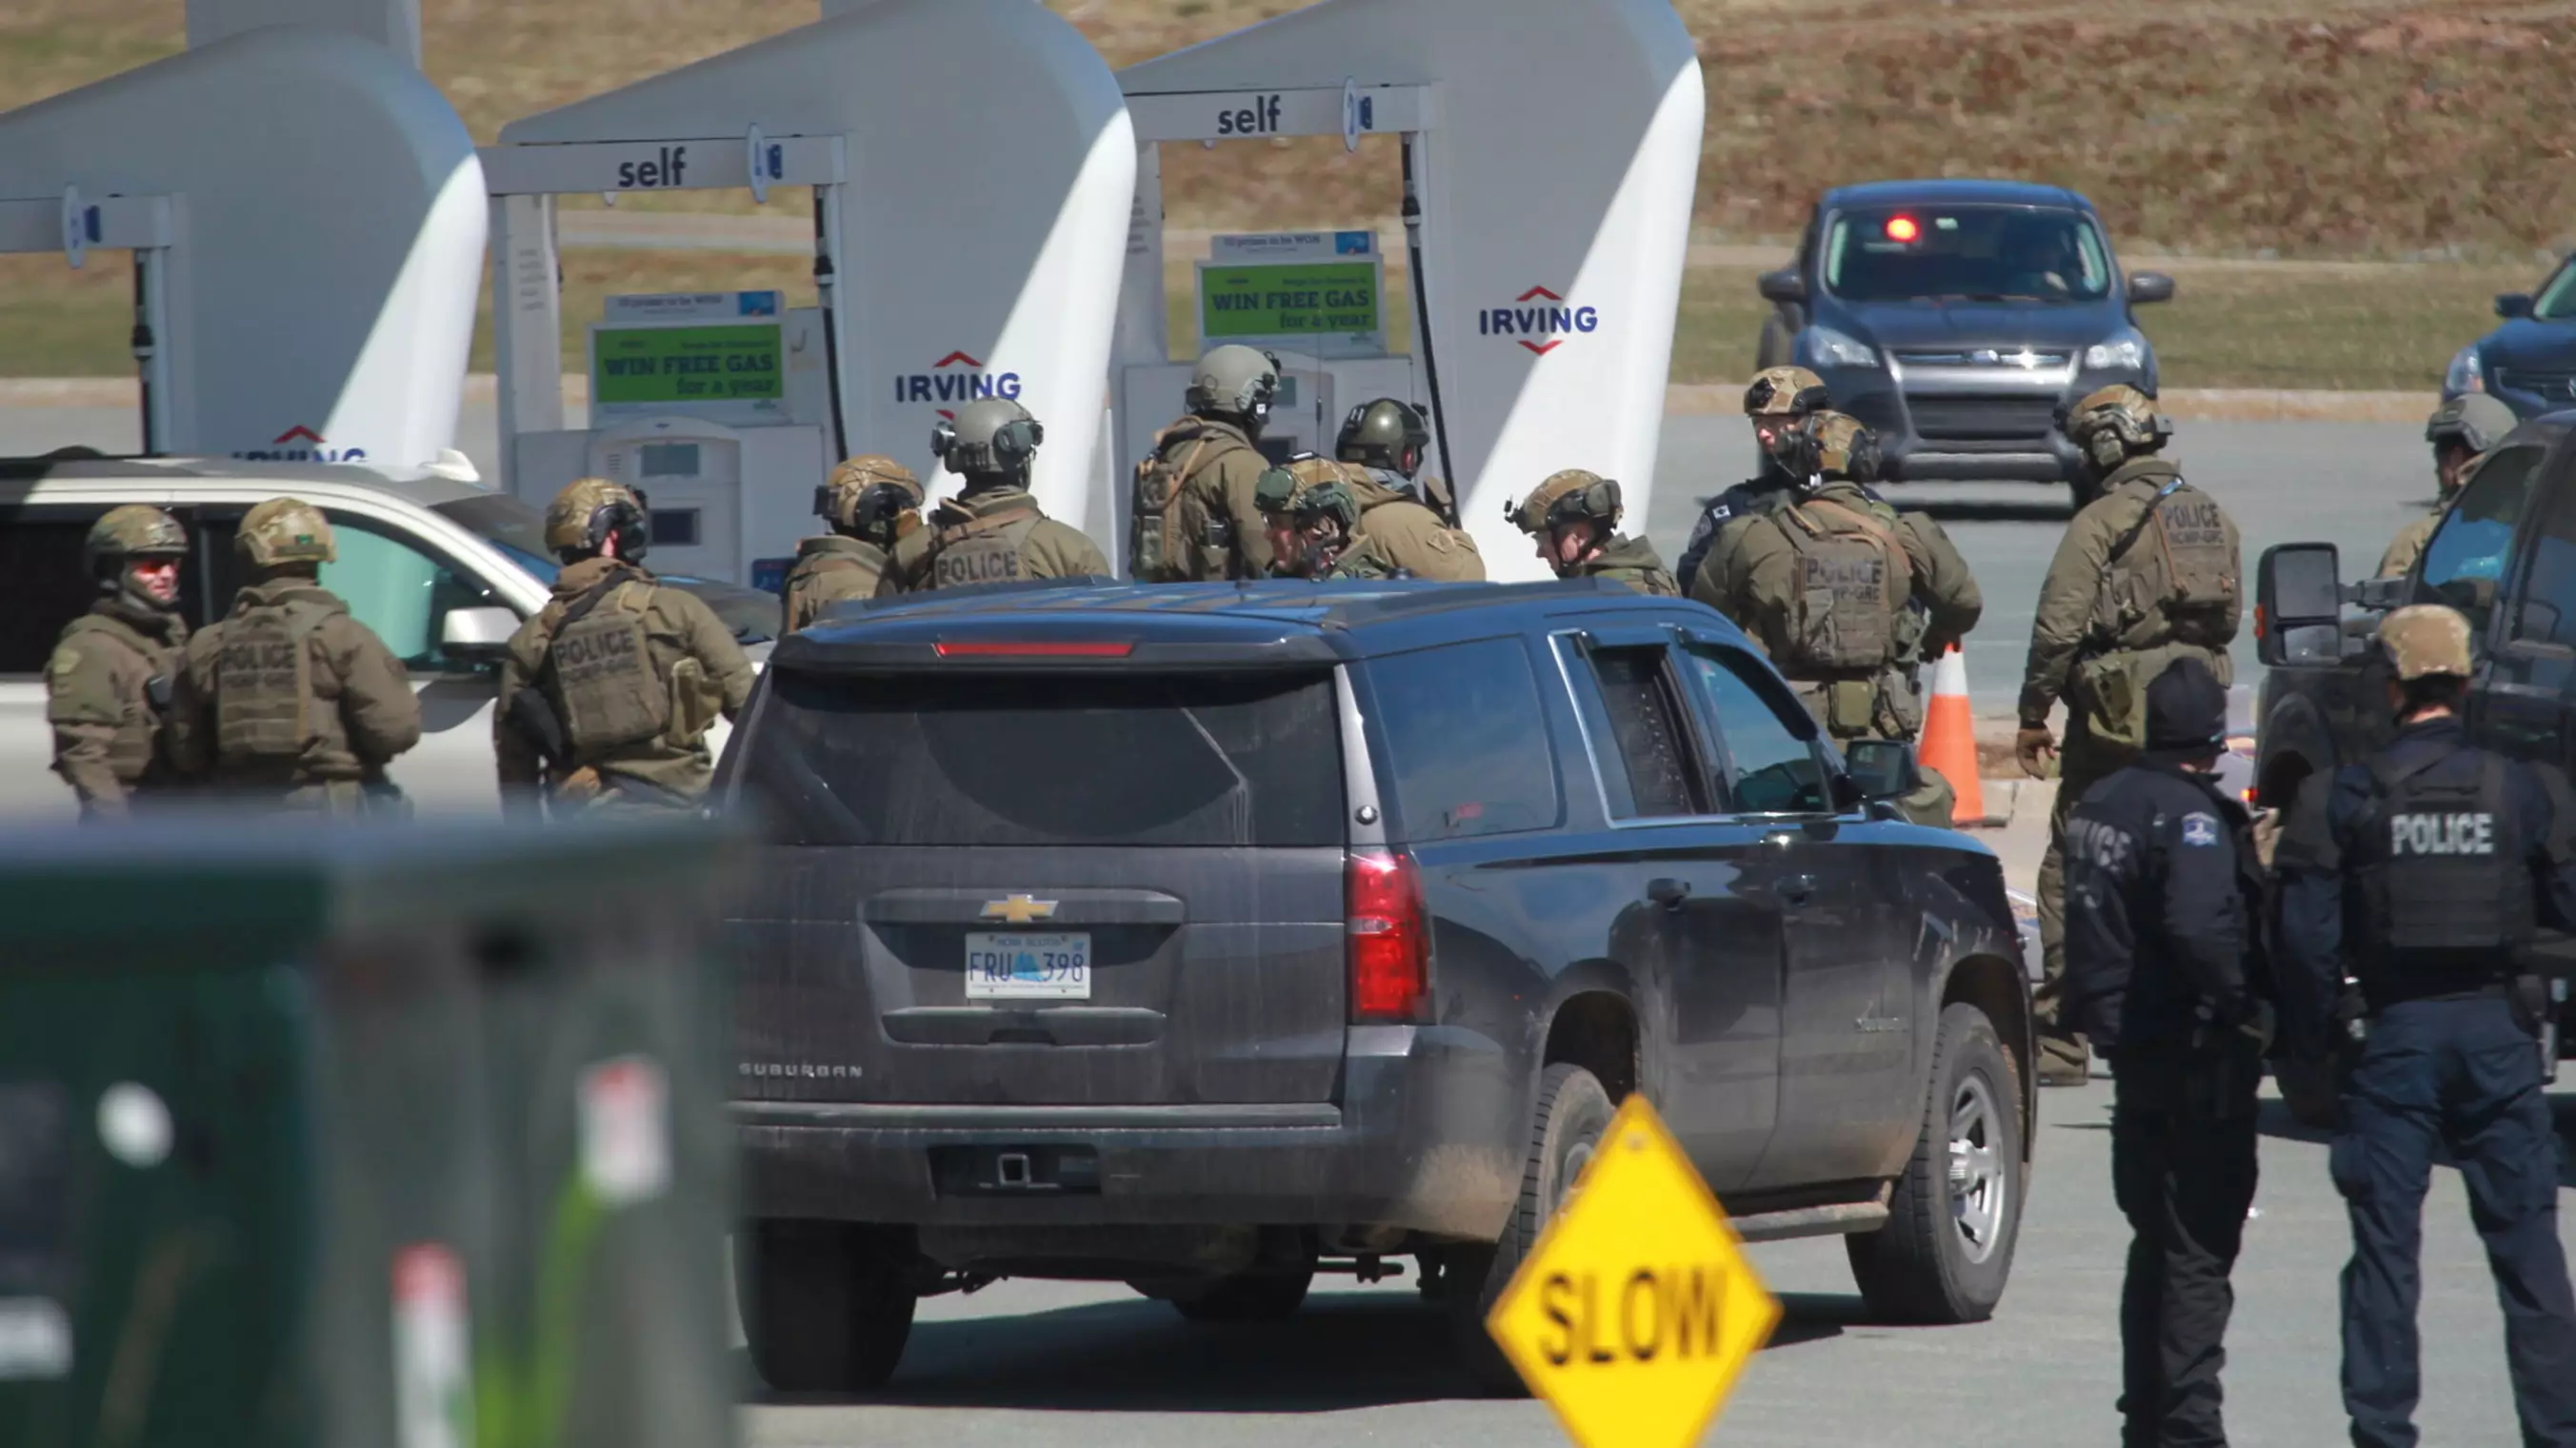 Man Kills More Than A Dozen People During 12-Hour Shooting Rampage In Canada